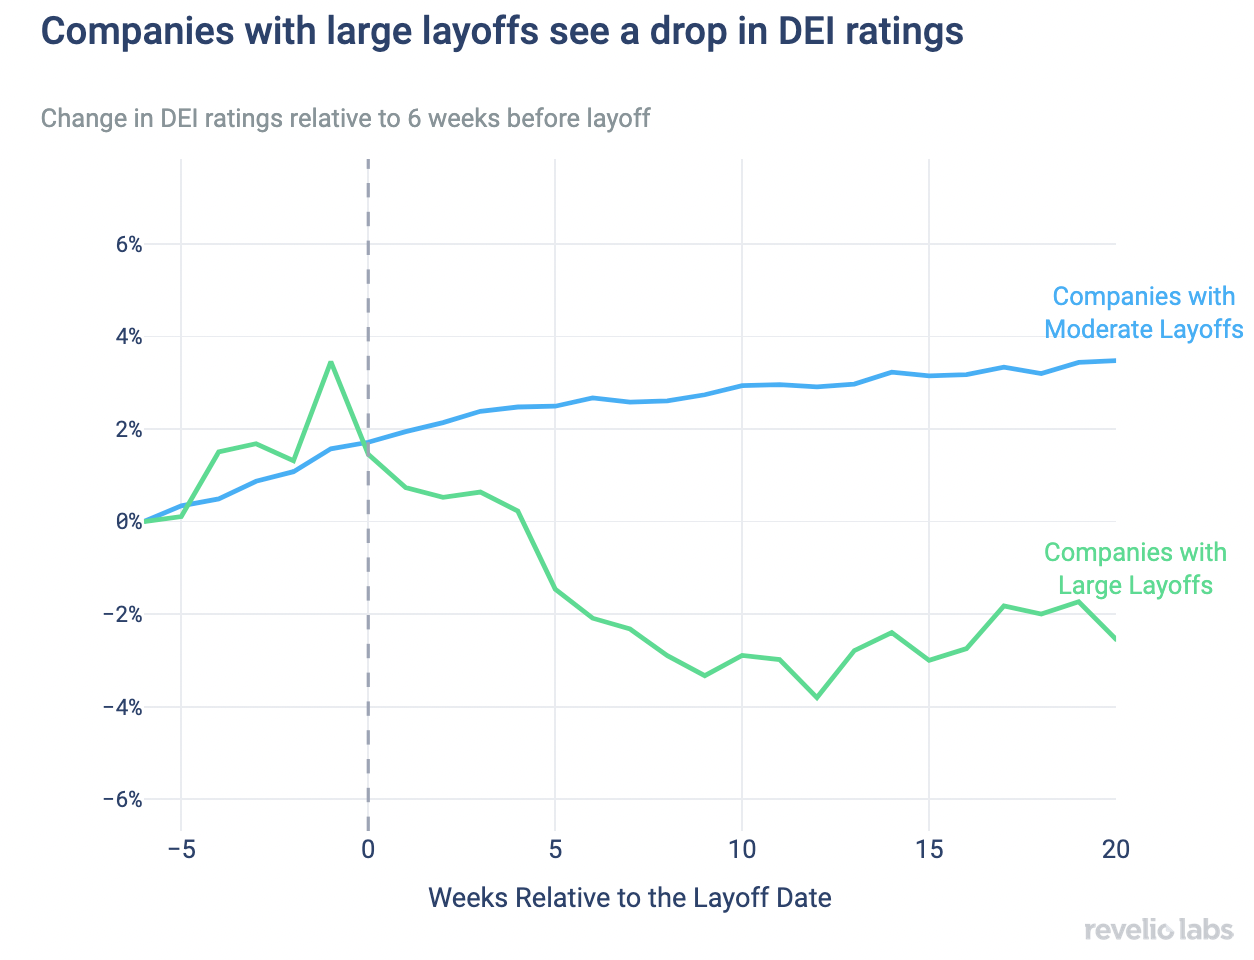 Companies with large layoffs see a drop in DEI ratings